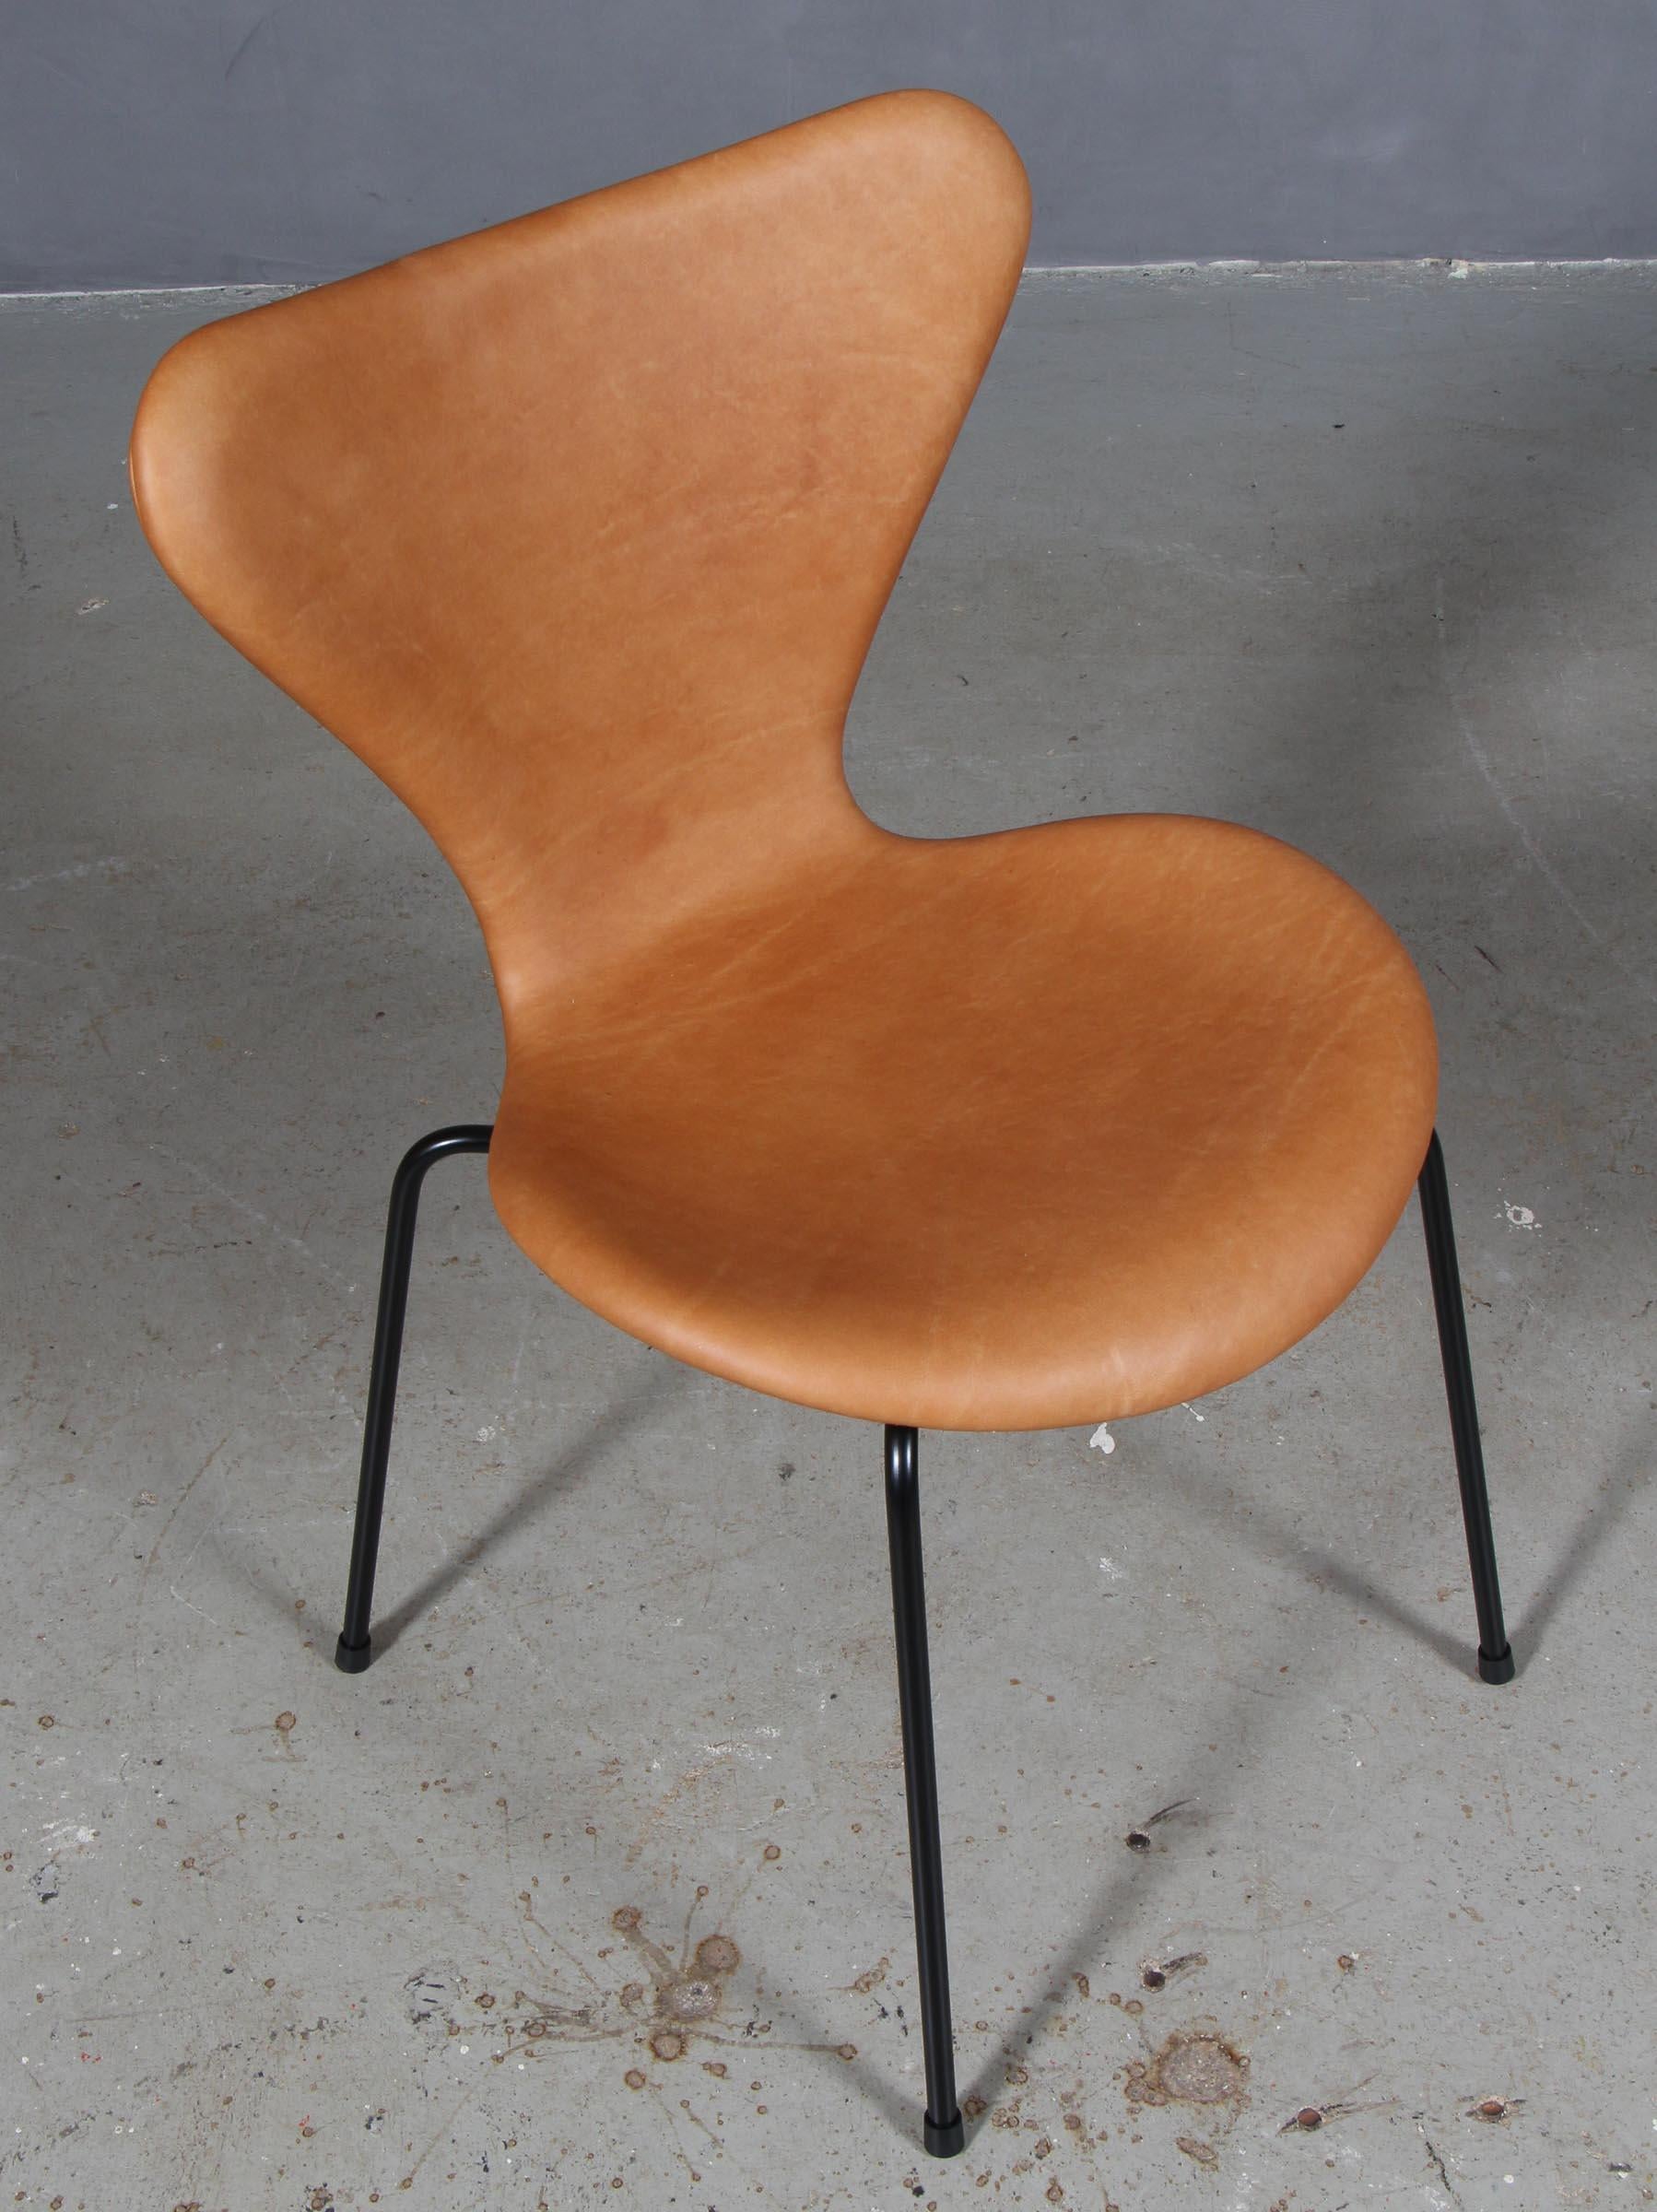 Arne Jacobsen dining chair new upholstered with cognac vintage aniline leather.

Base of powder coated steel tube.

Model 3107 Syveren, made by Fritz Hansen.